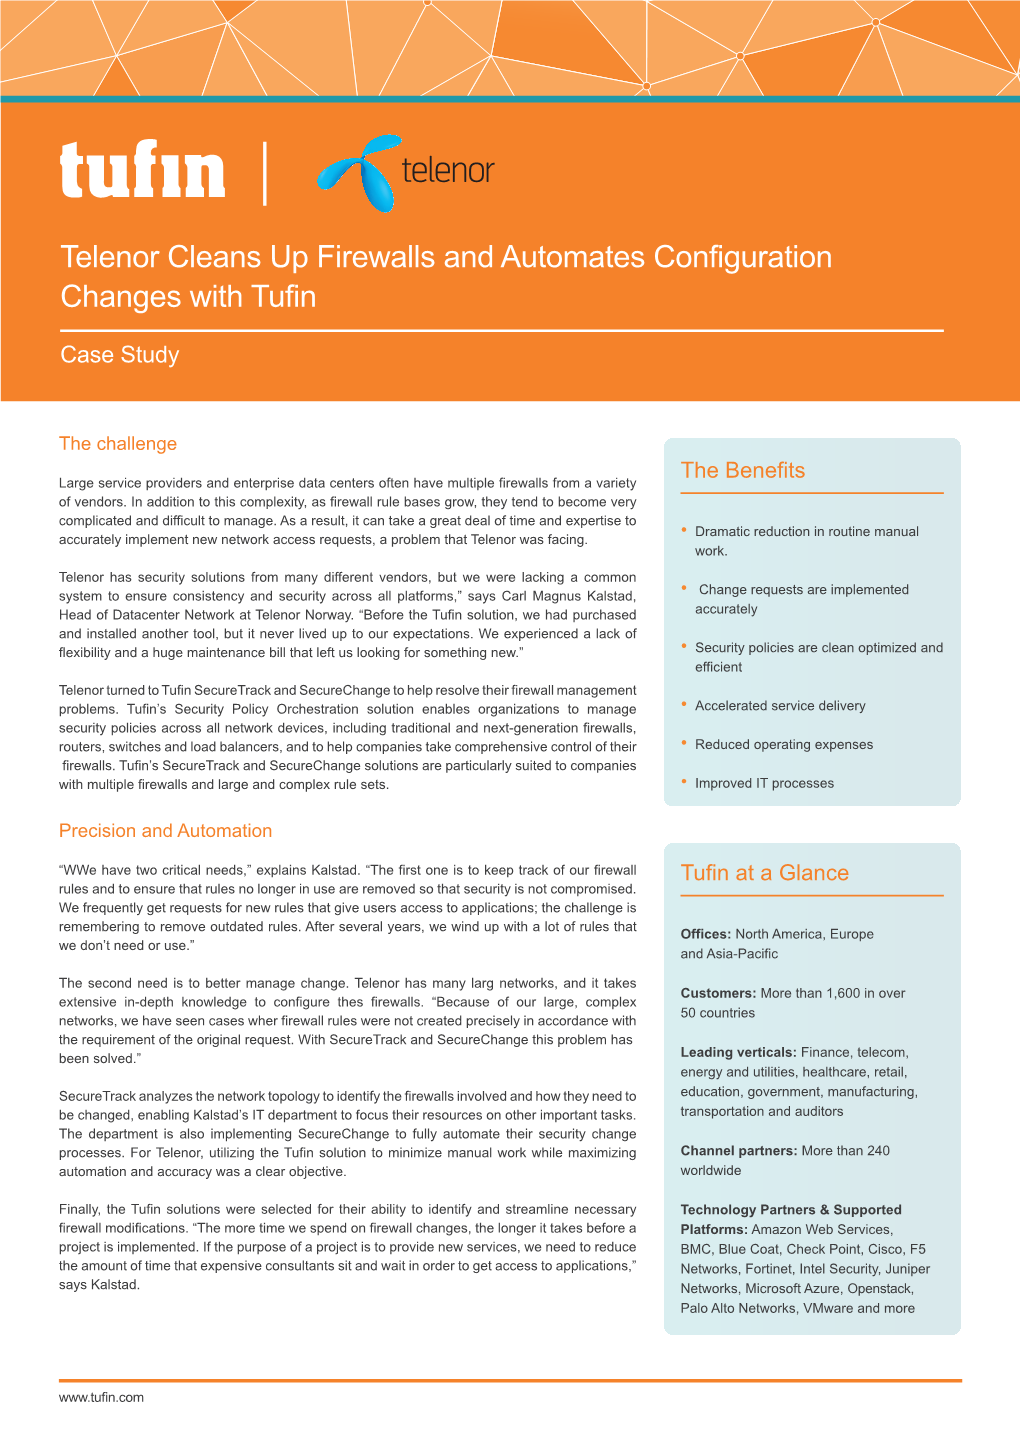 Telenor Cleans up Firewalls and Automates Configuration Changes with Tufin